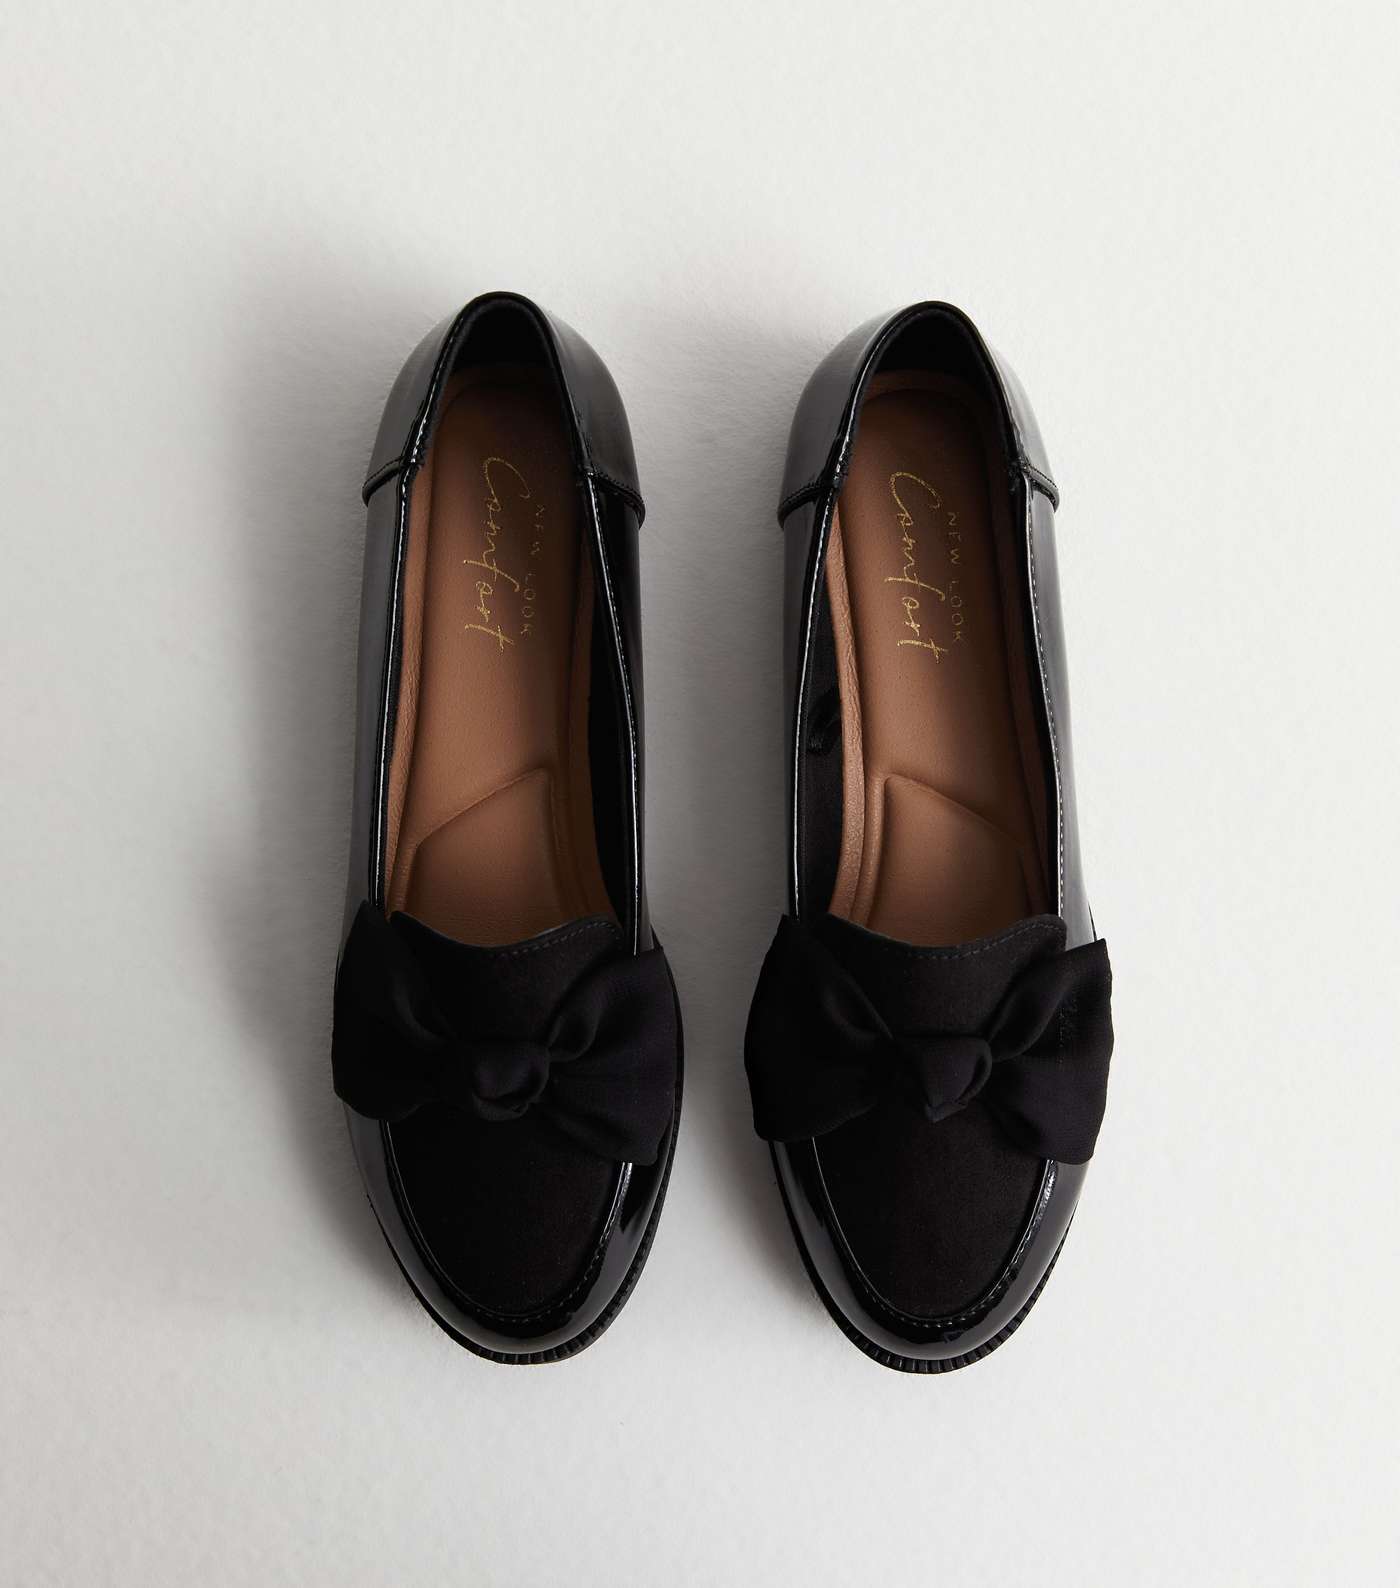 Black Patent Suedette Bow Loafers Image 3